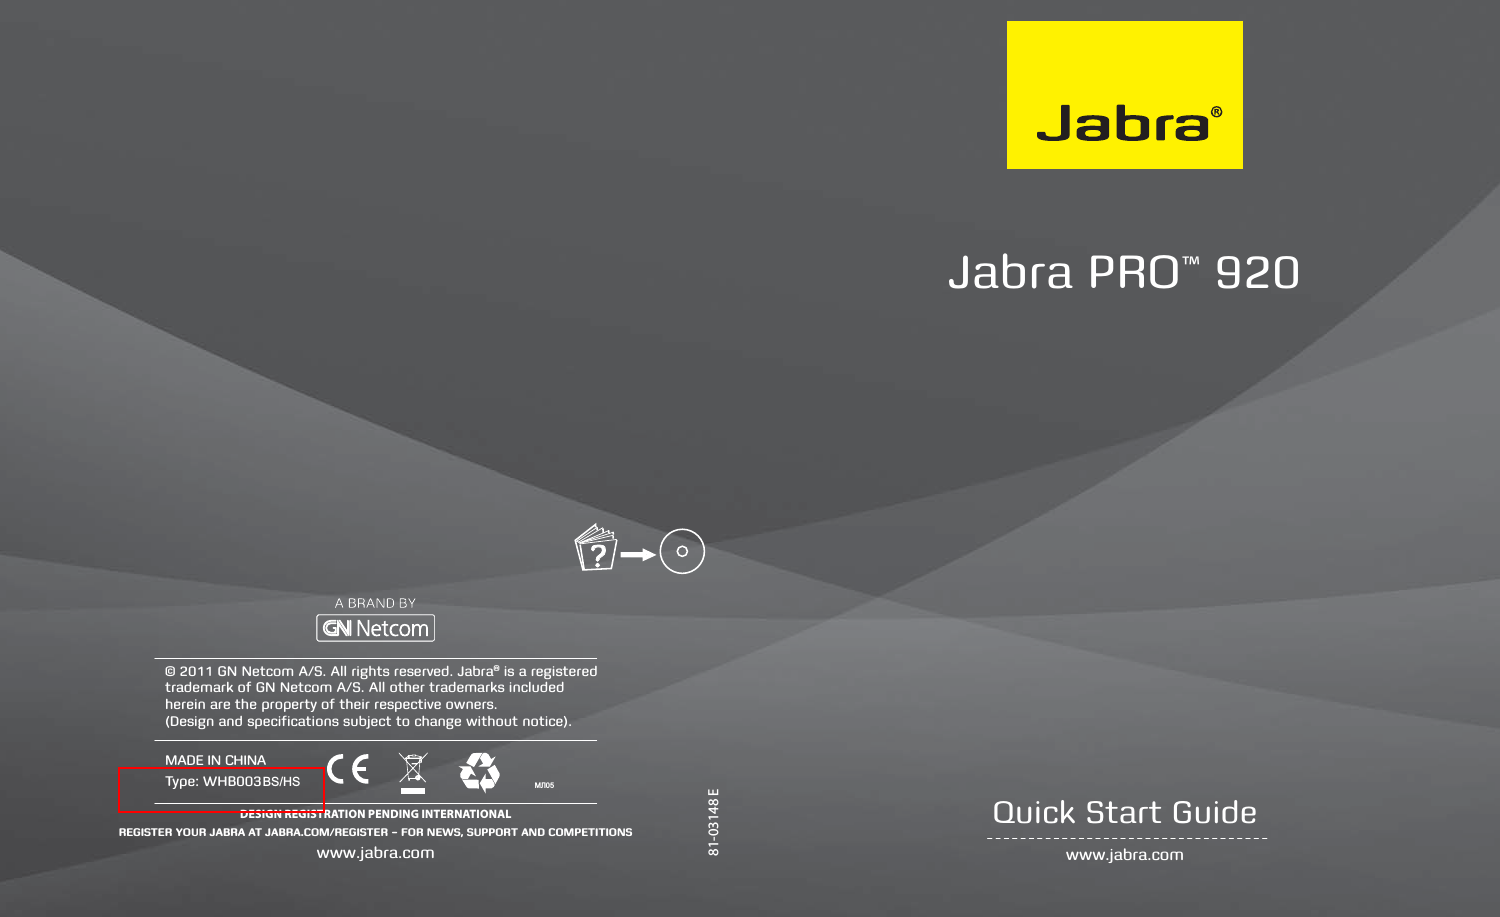 81-03148 EJabra PRO™ 920  www.jabra.comQuick Start Guide© 2011 GN Netcom A/S. All rights reserved. Jabra® is a registered trademark of GN Netcom A/S. All other trademarks included herein are the property of their respective owners.  (Design and specifications subject to change without notice).DESIGN REGISTRATION PENDING INTERNATIONALREGISTER YOUR JABRA AT JABRA.COM/REGISTER – FOR NEWS, SUPPORT AND COMPETITIONSwww.jabra.comMADE IN CHINAType: WHB003?0ɅBS/HS 